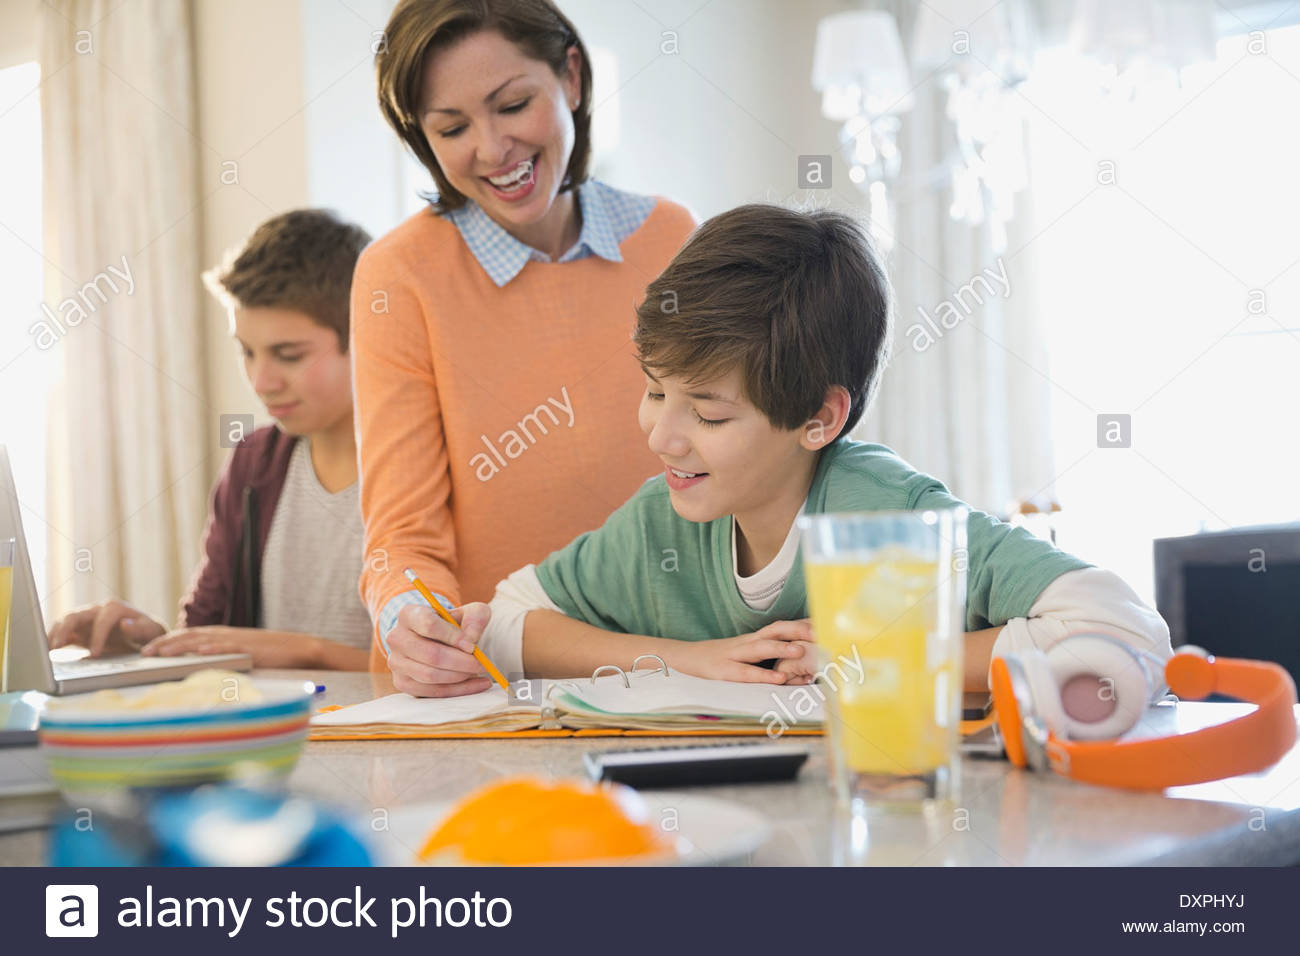 Smiling woman assisting son with homework Stock Photo